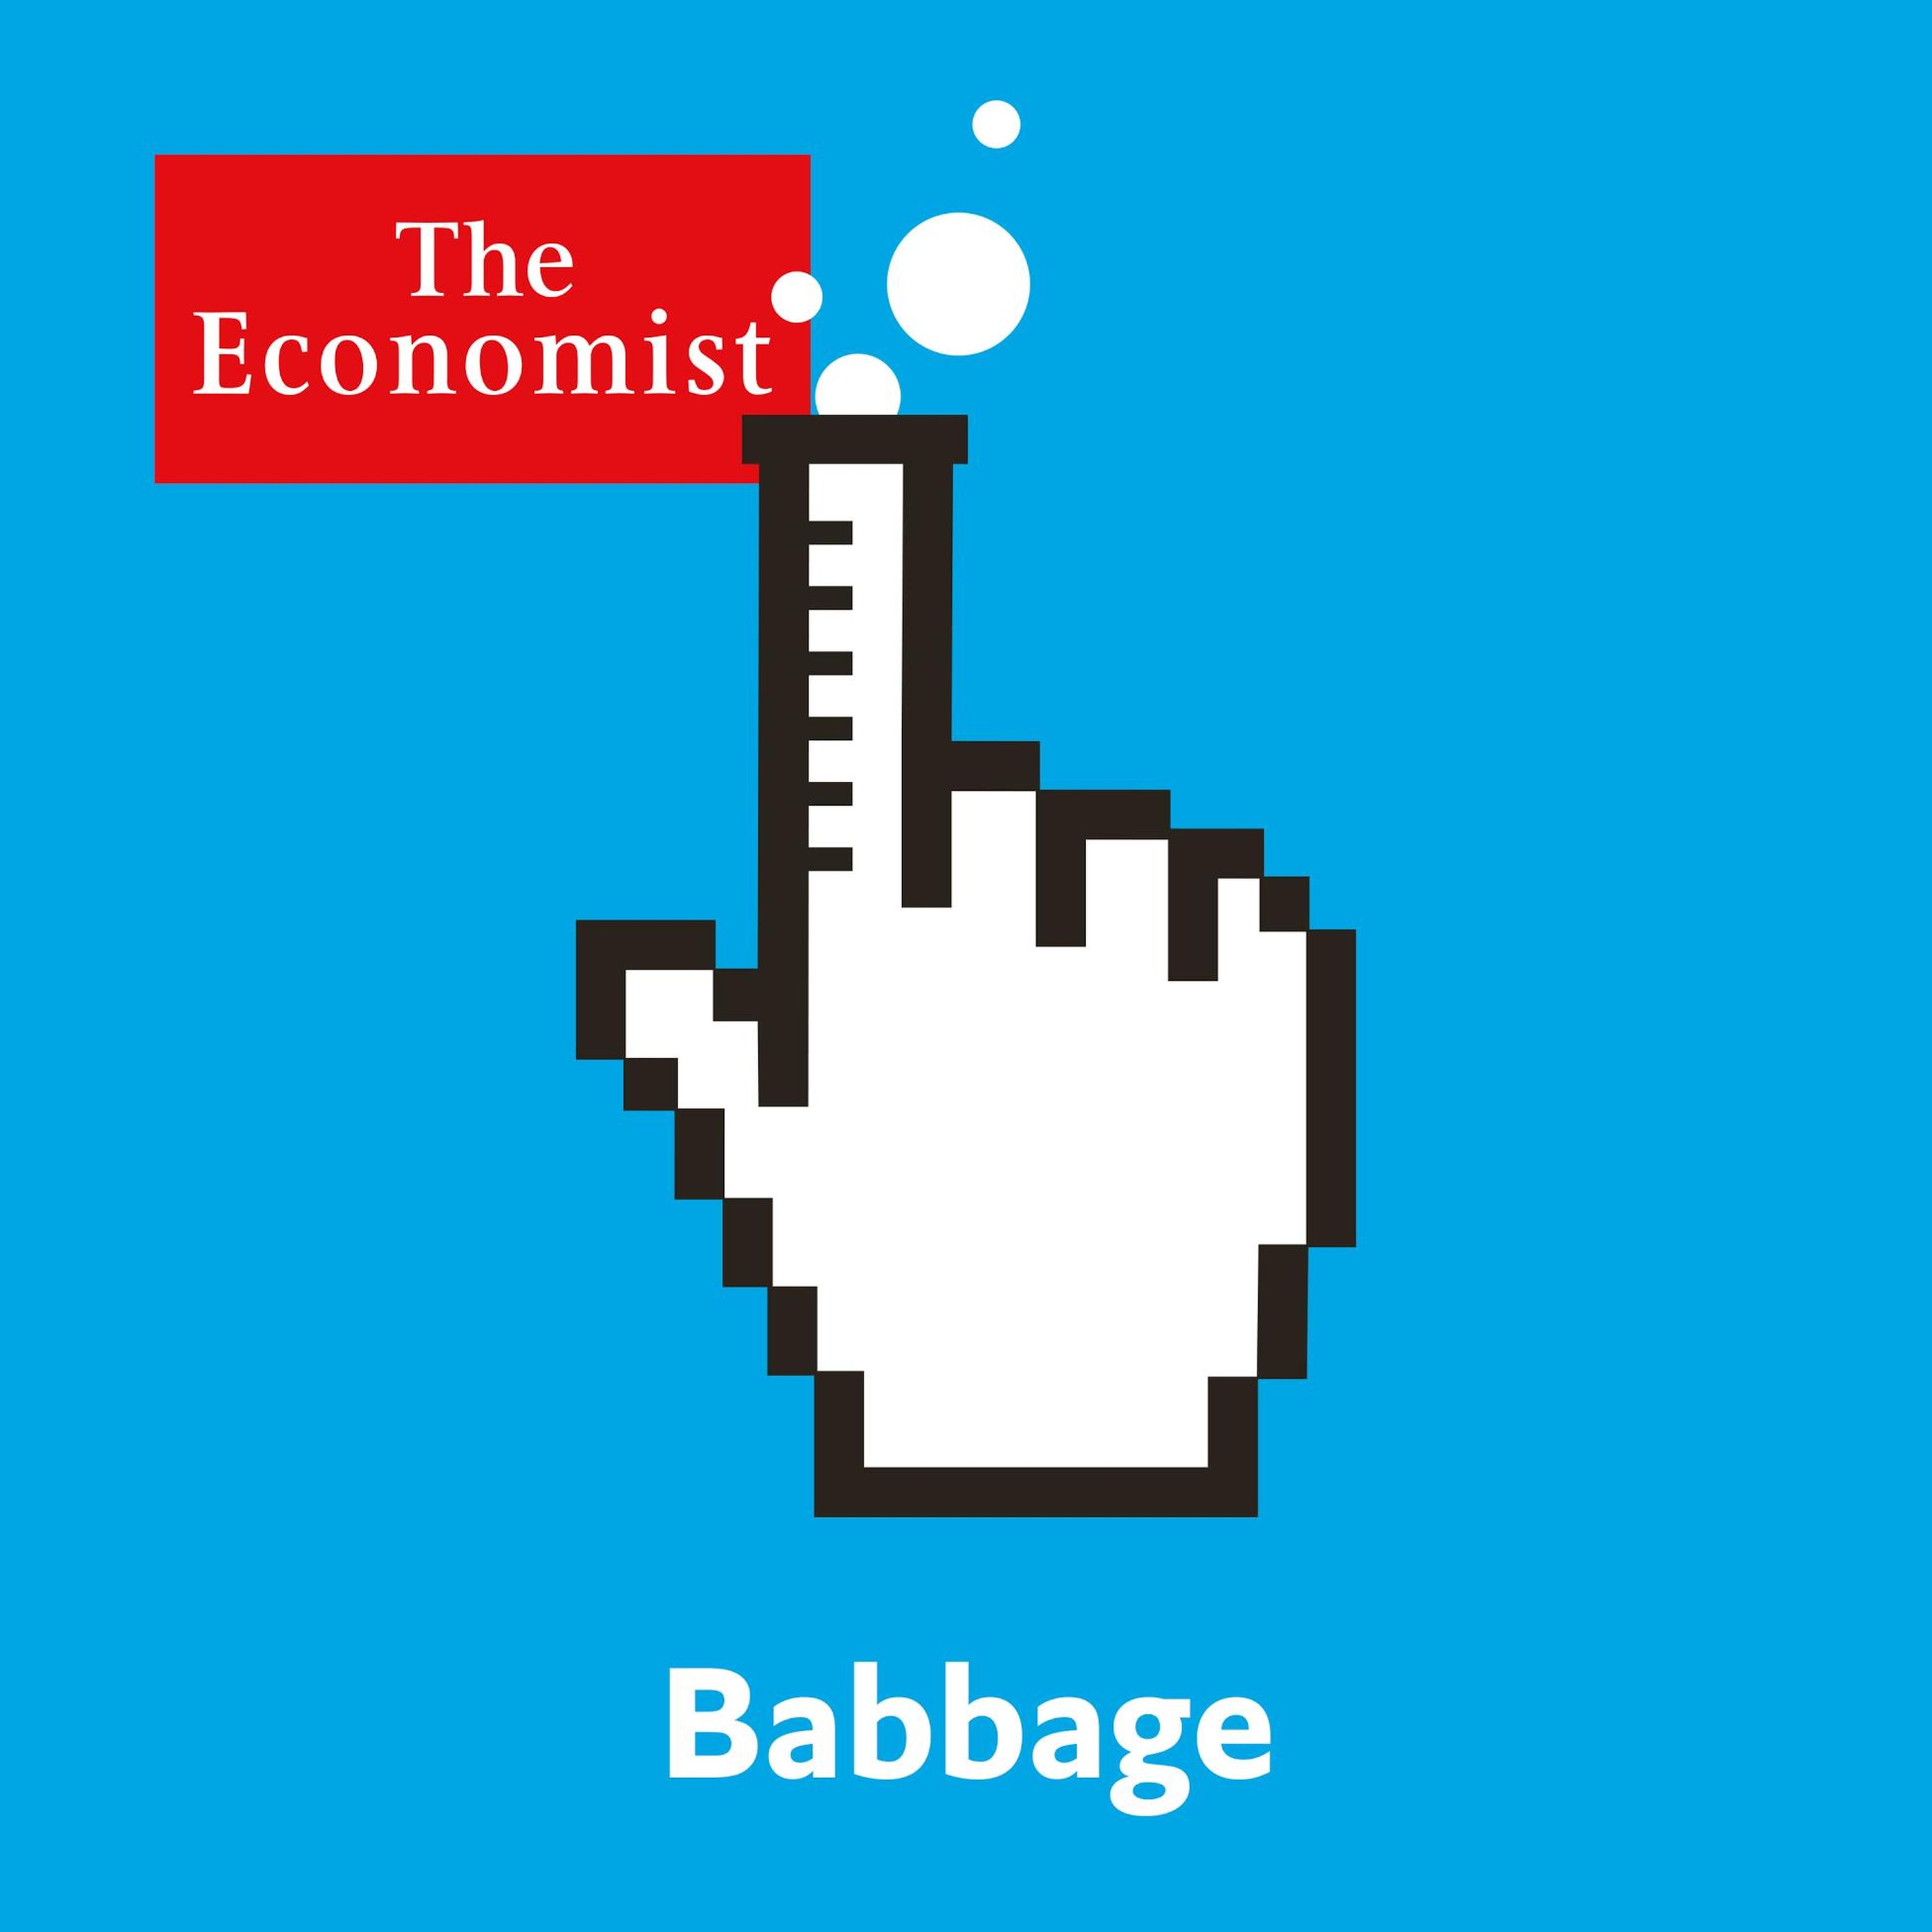 Babbage: How to go green amid an energy crisis